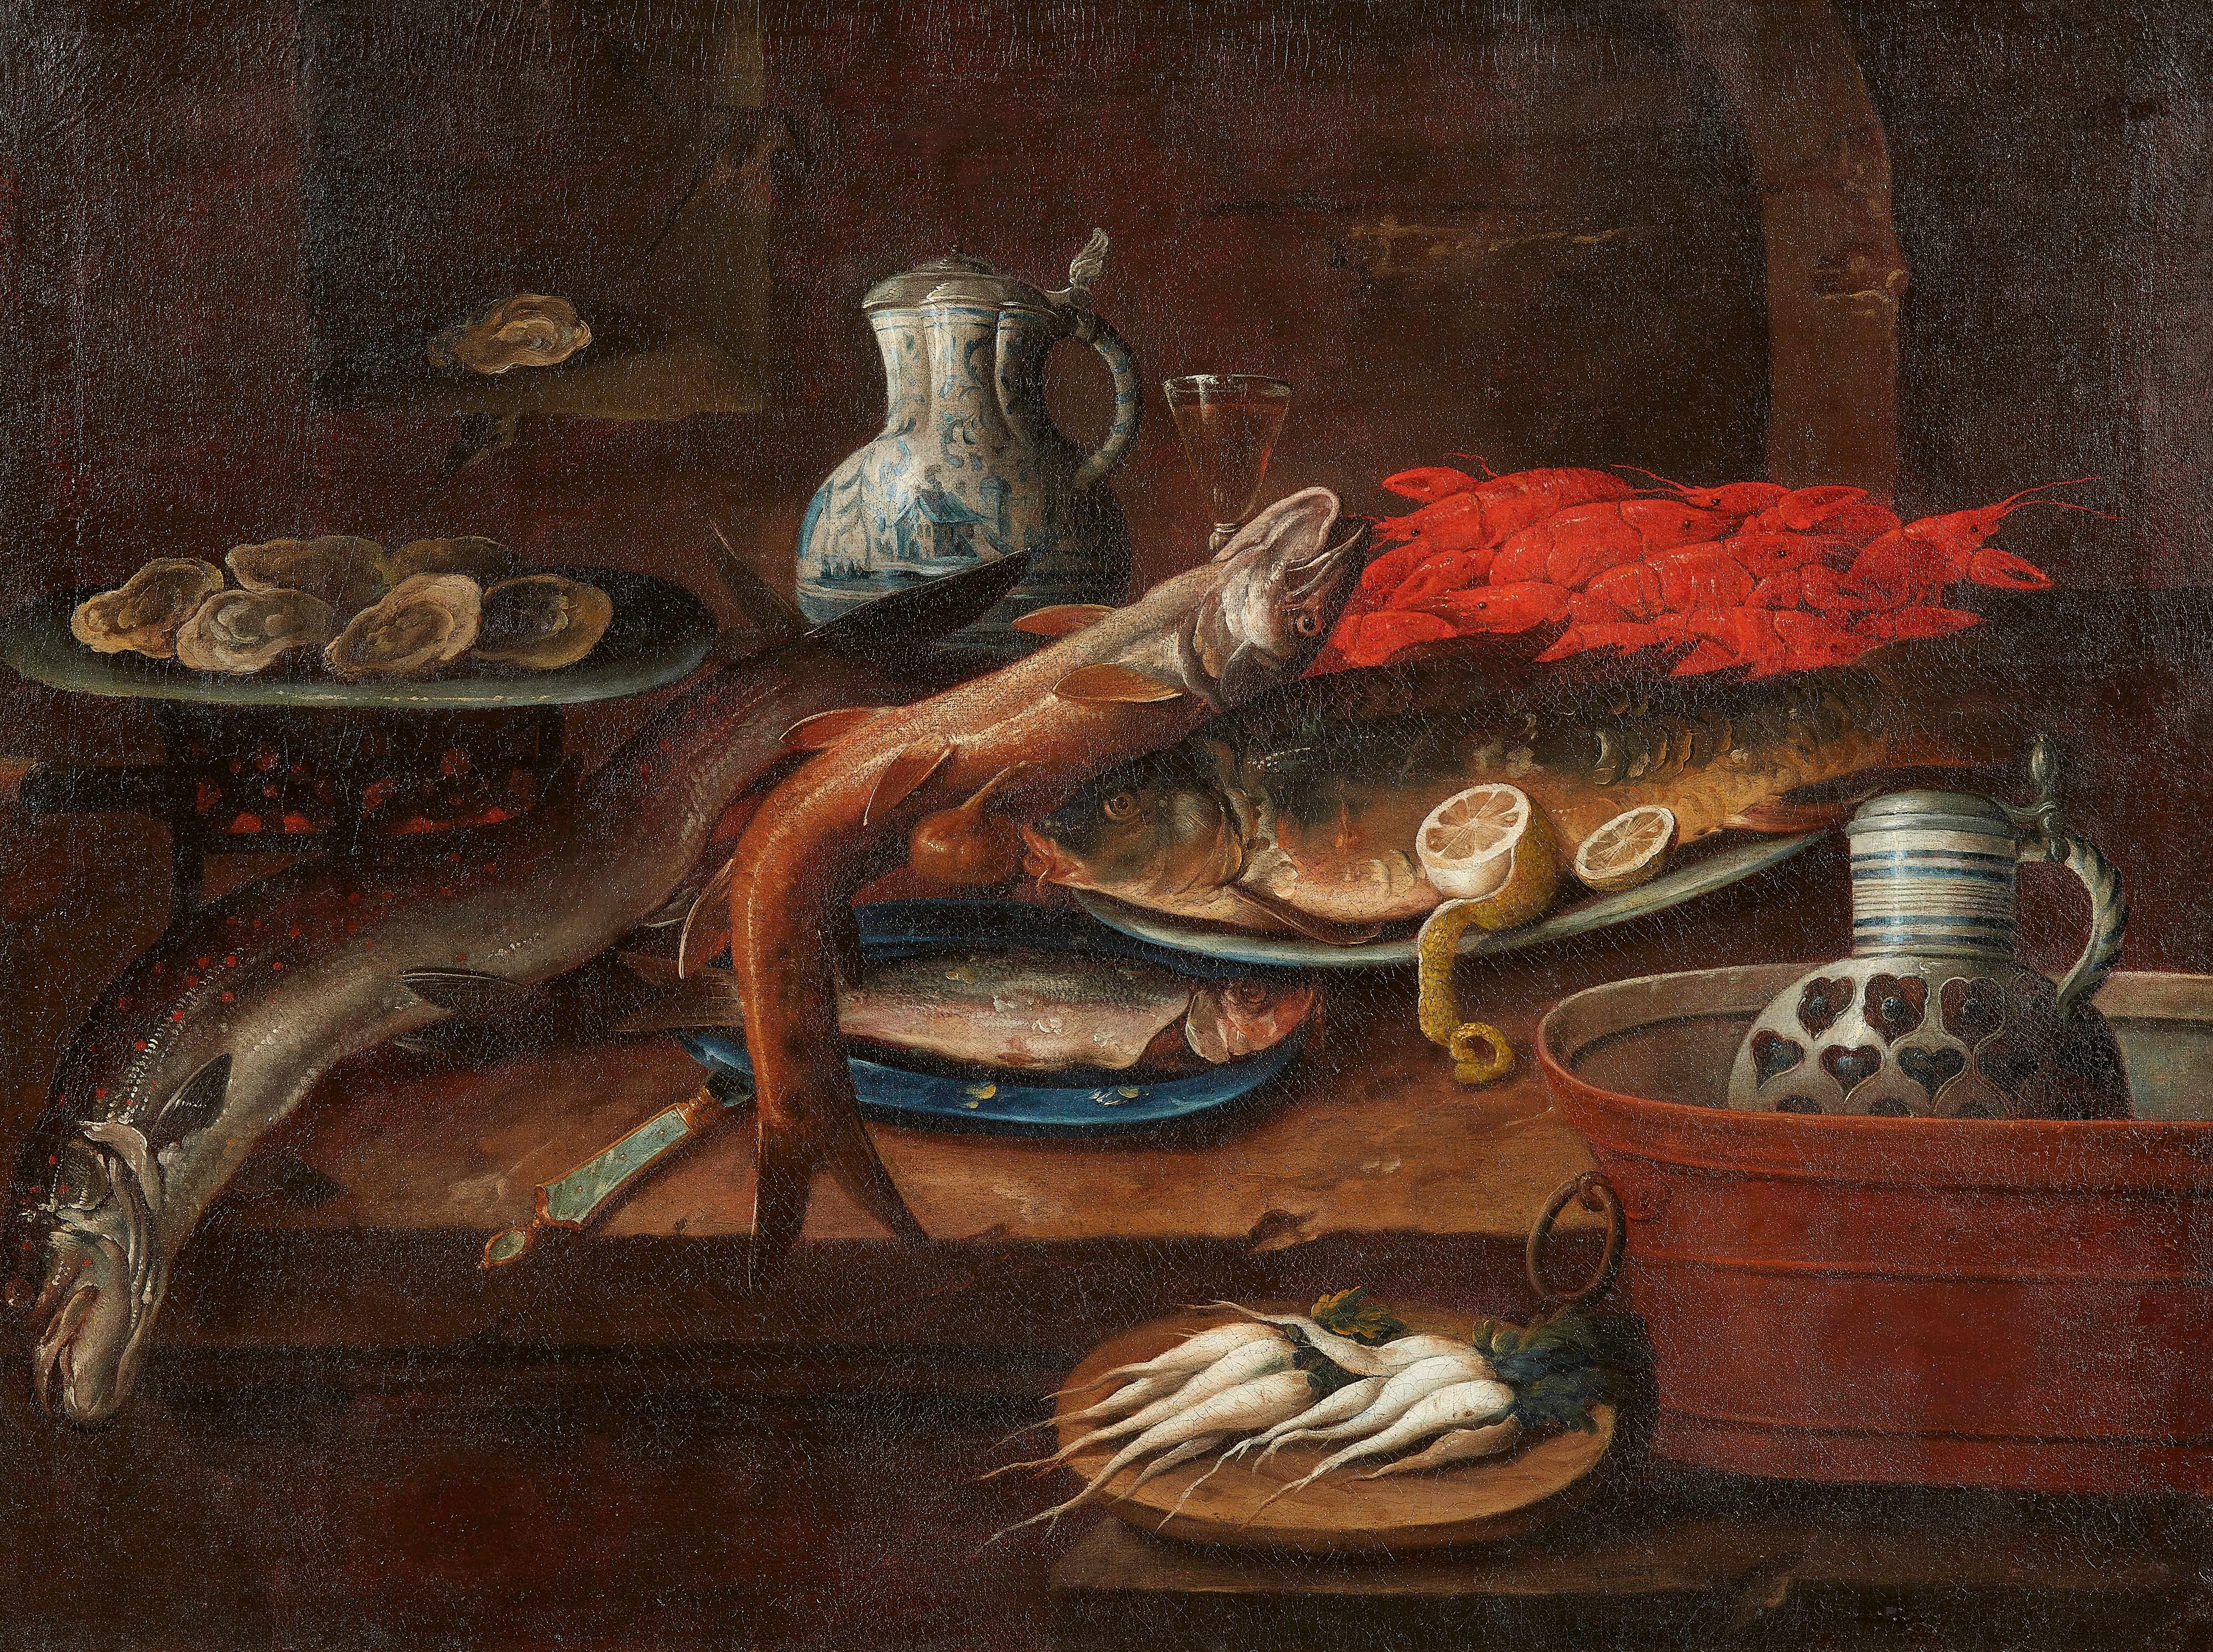 Hendrick Andriessen, attributed to - Still life with fish, seafood, clay jugs and a bowl of white turnips - image-1